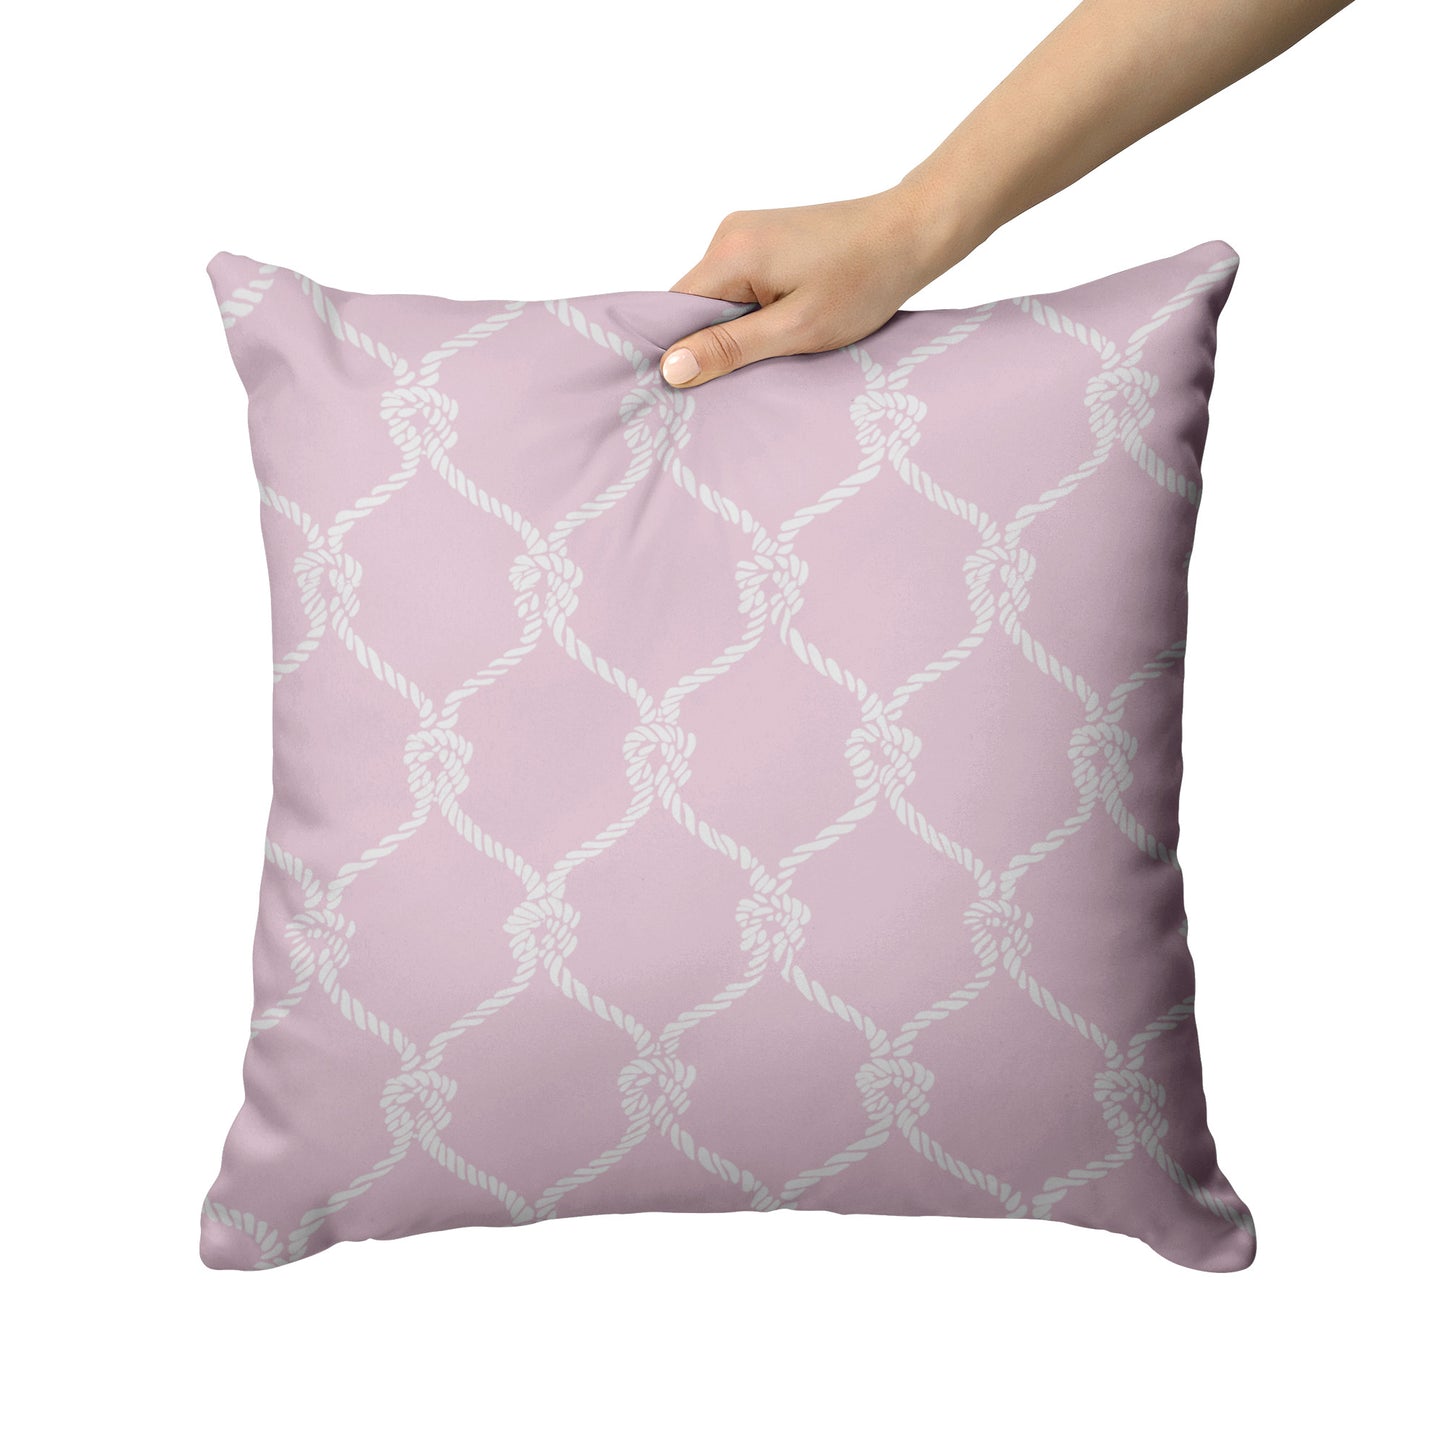 Nautical Netting Design on Pink Background, Throw Pillow